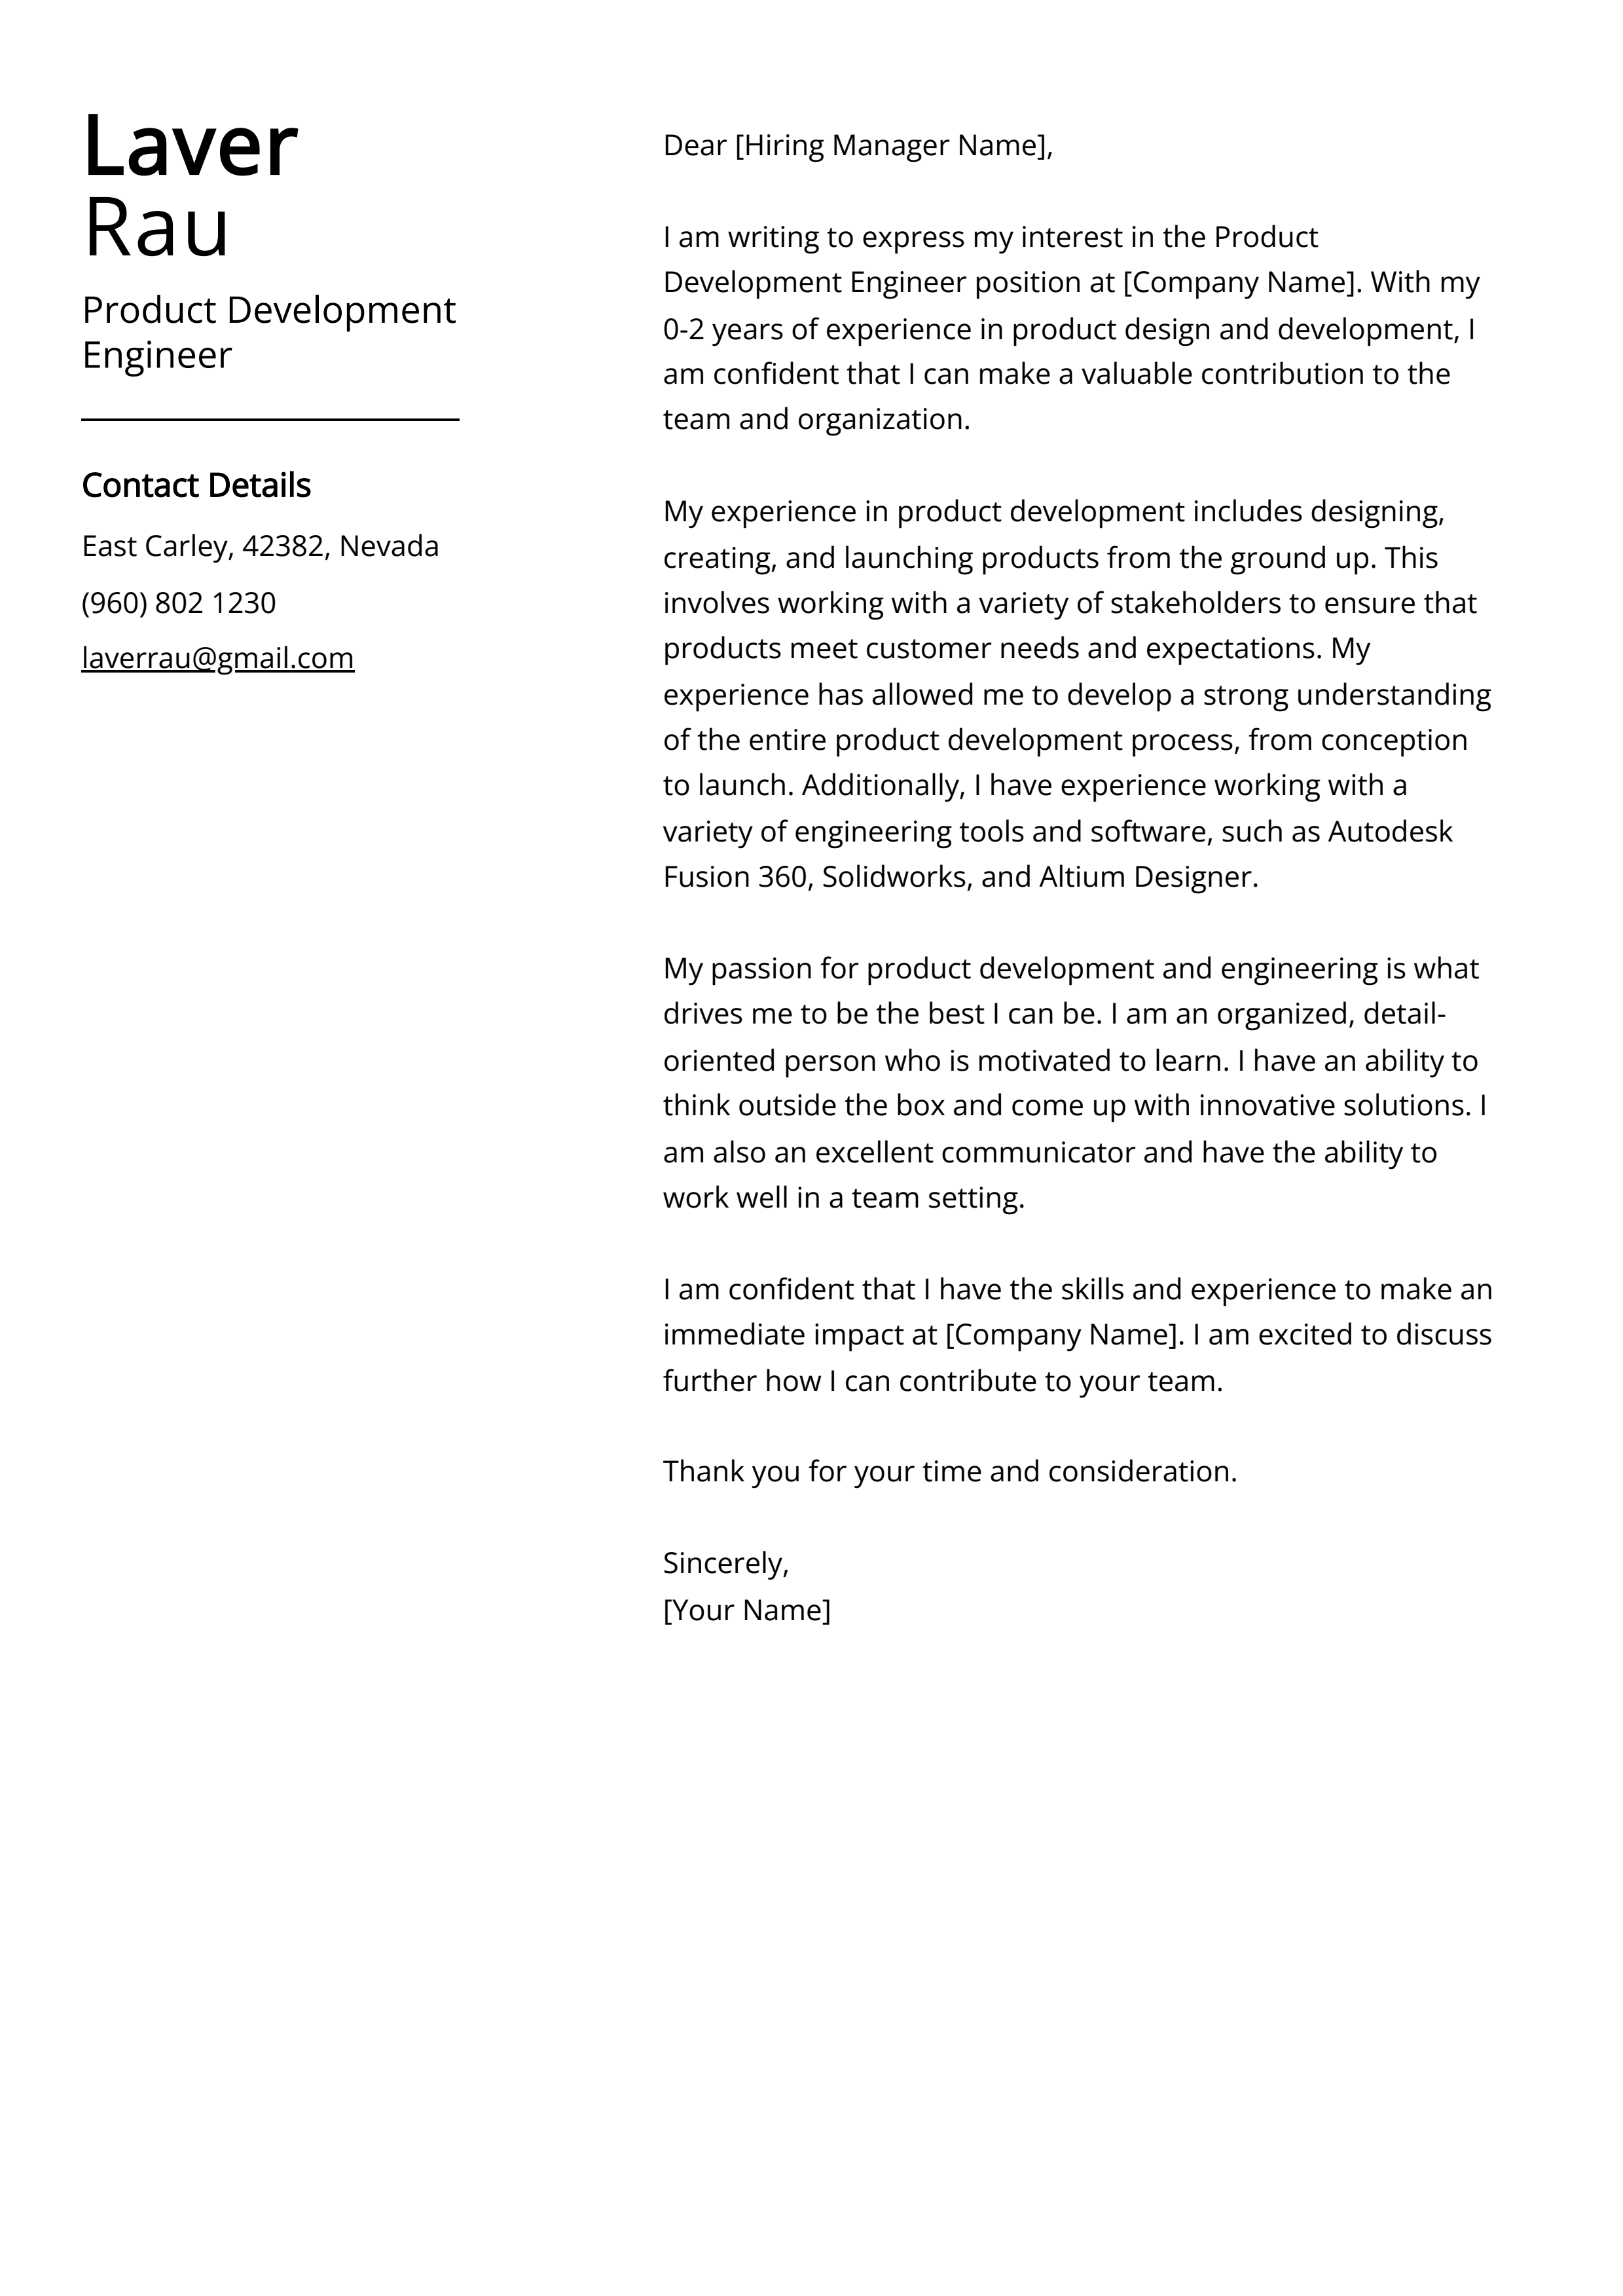 Product Development Engineer Cover Letter Example